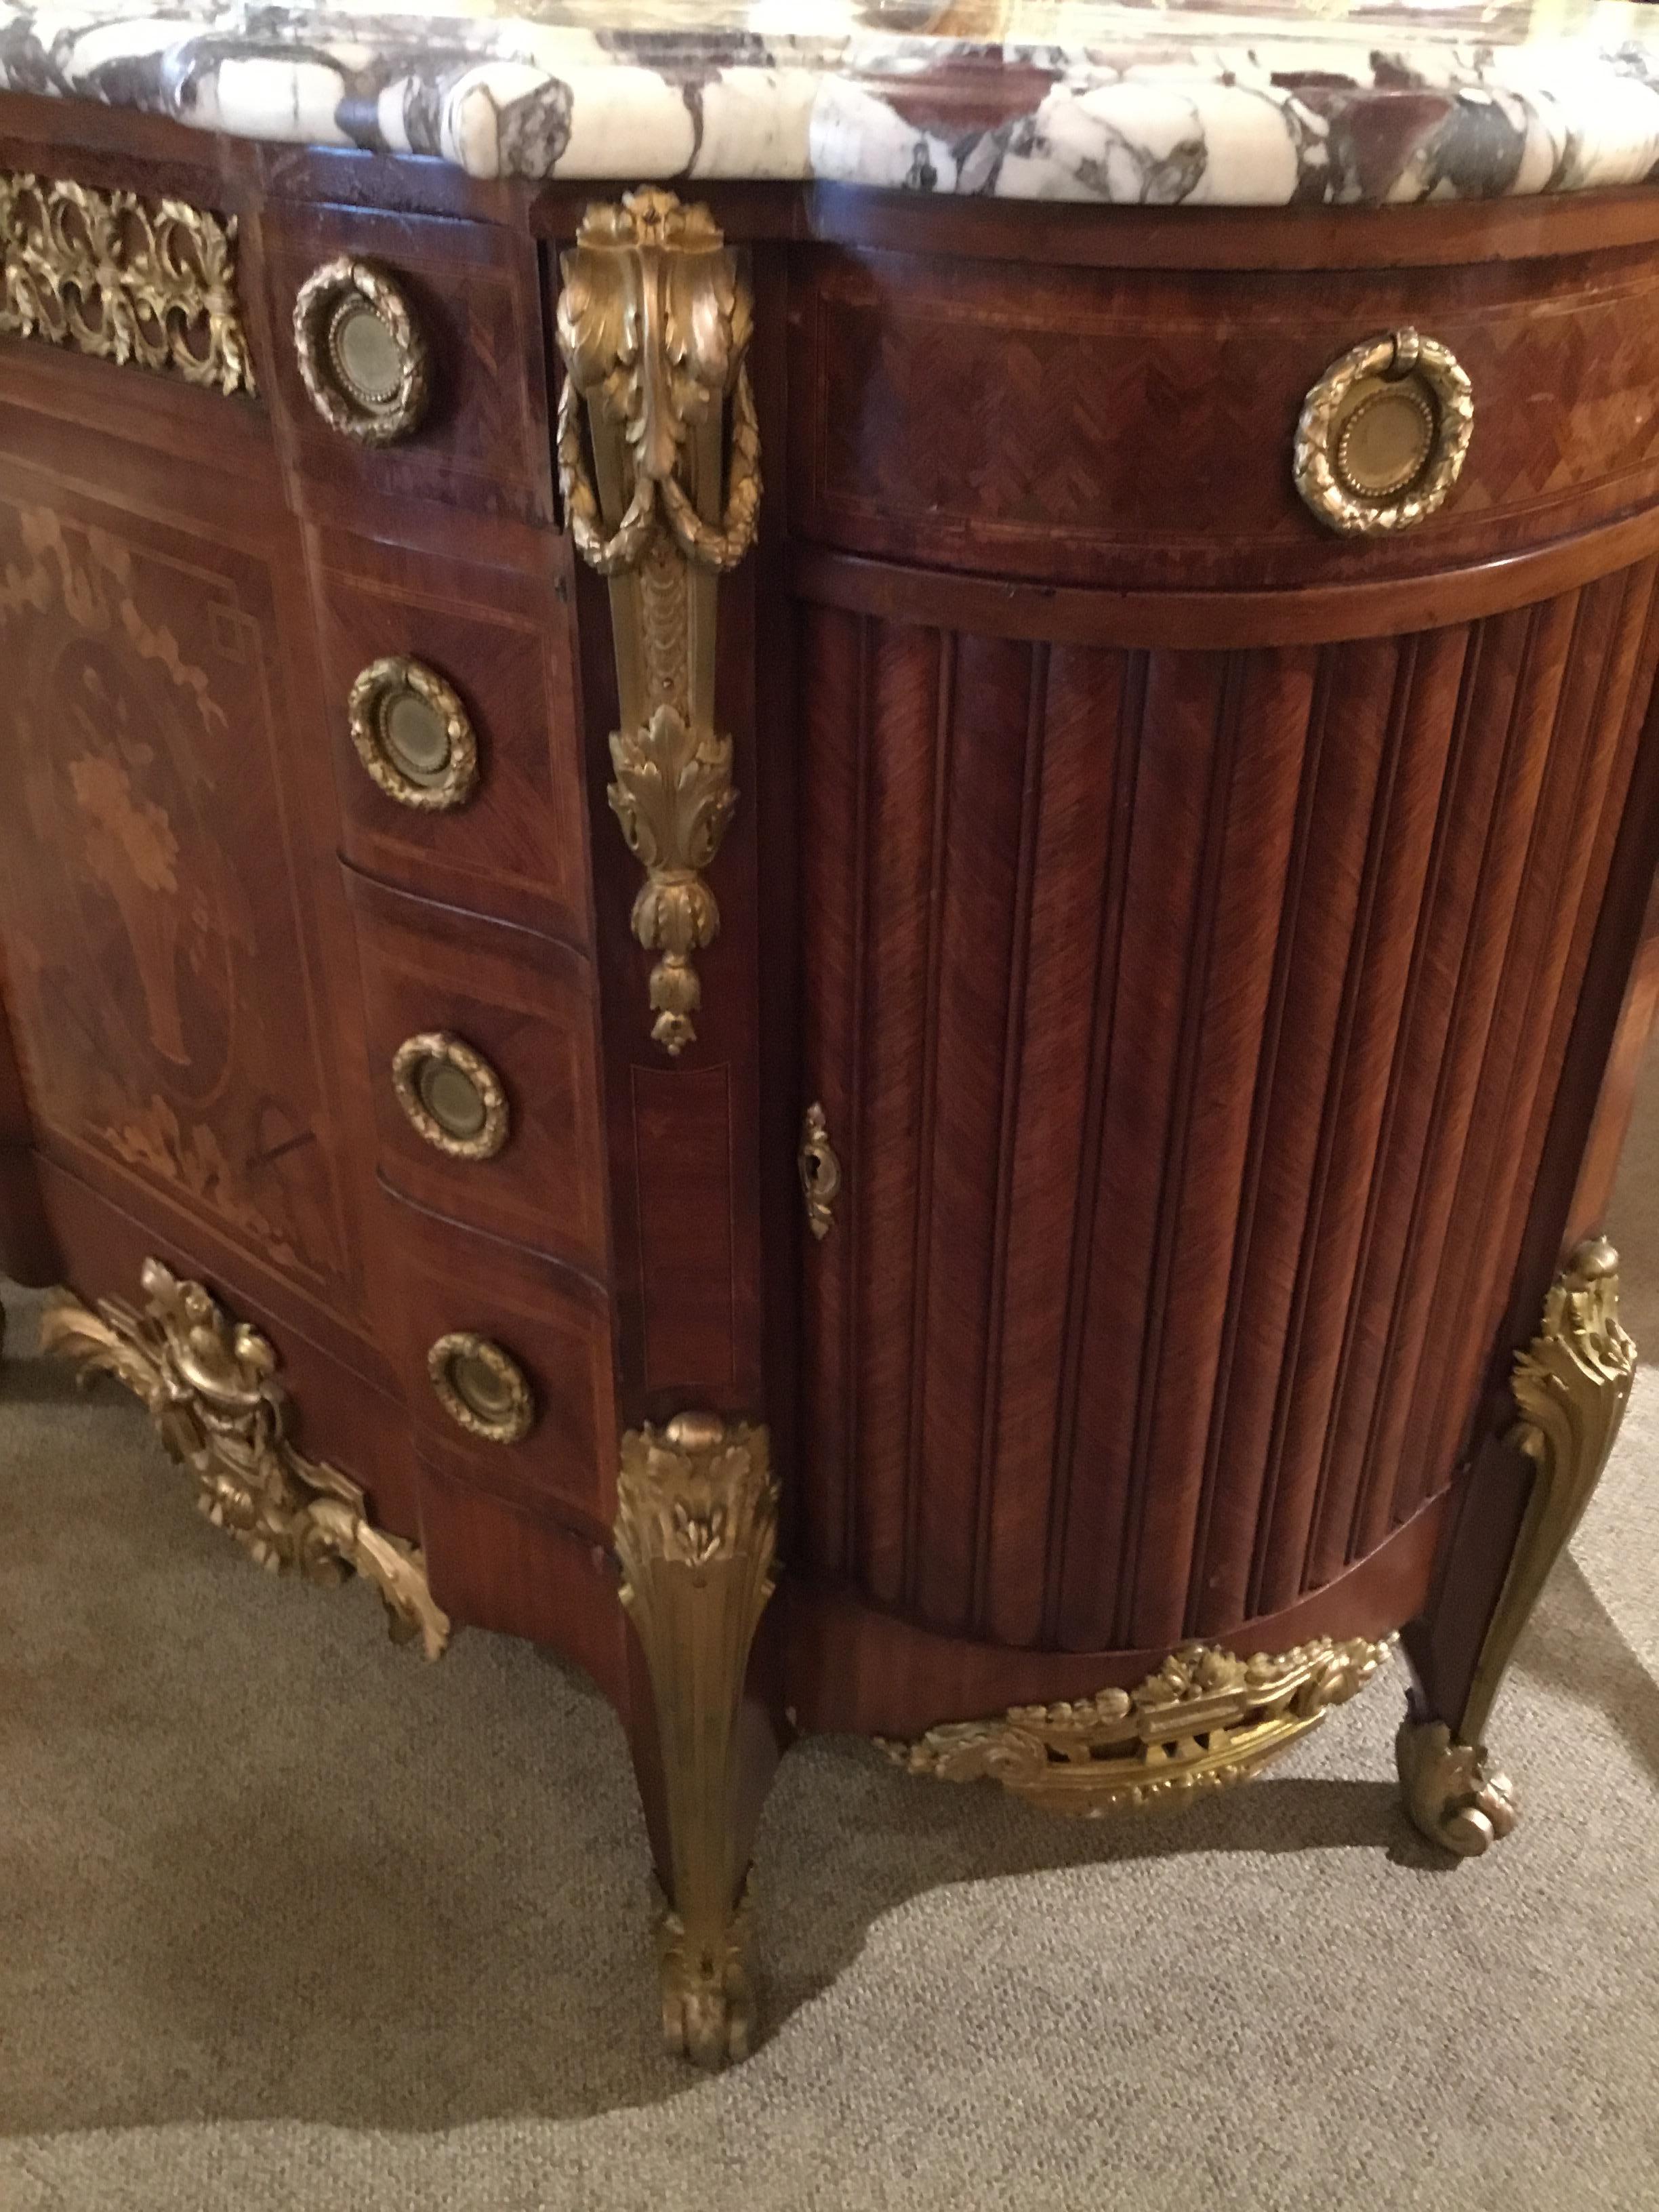 Marquetry French Regency Style Gilt Bronze Mounted Sideboard/Commode Mahogany 19th Century